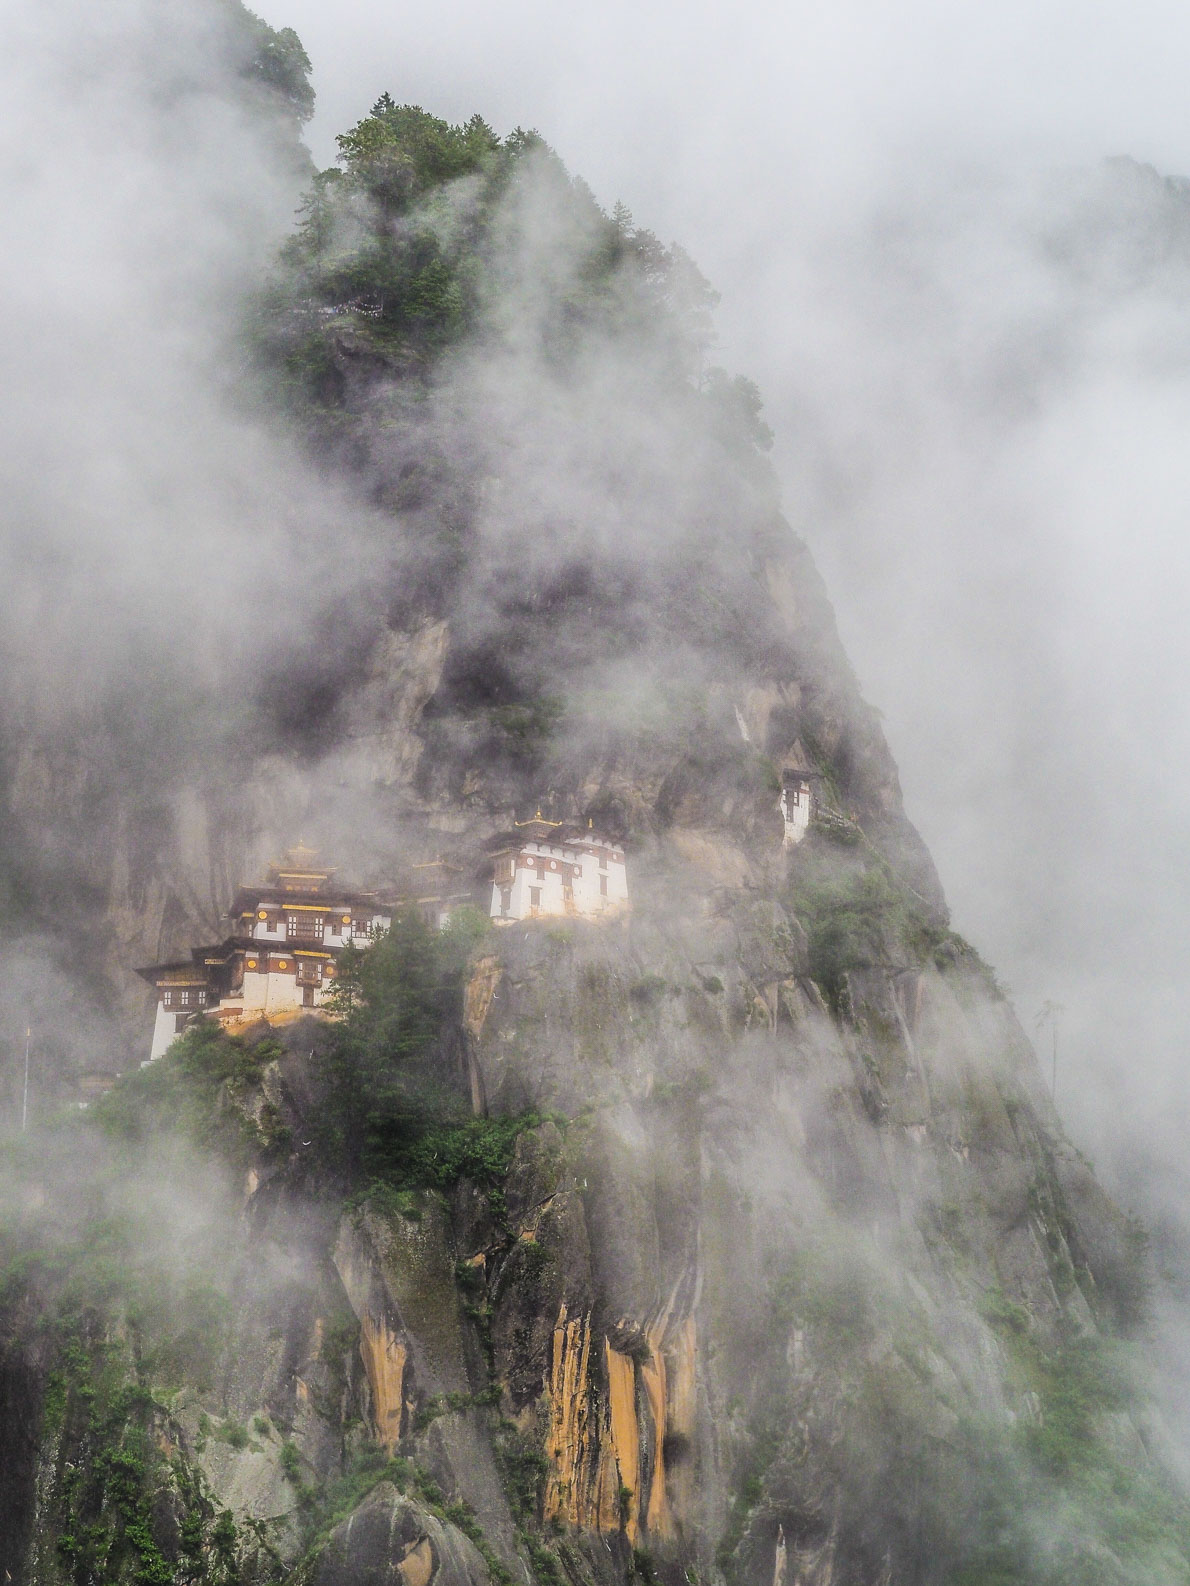 Tiger Nest Monastery in the clouds in Bhutan